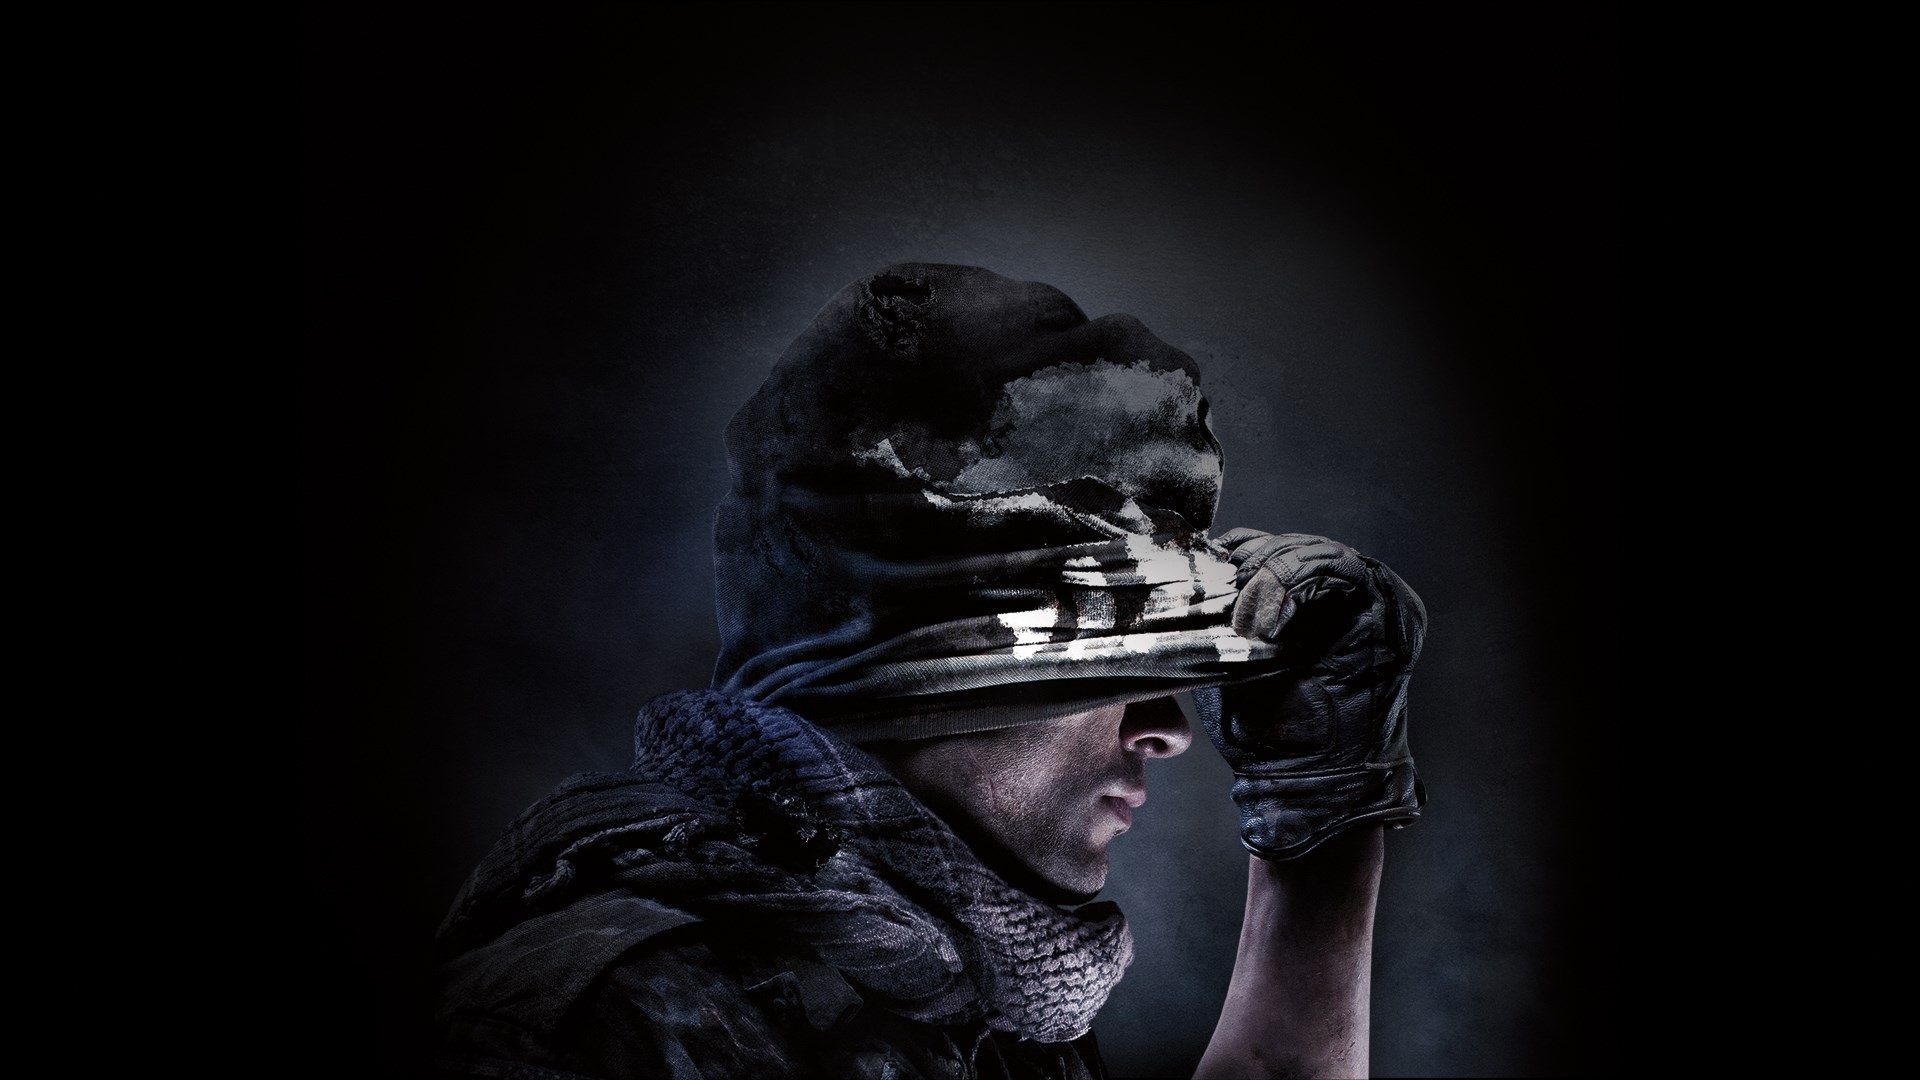 Call Of Duty Ghosts 